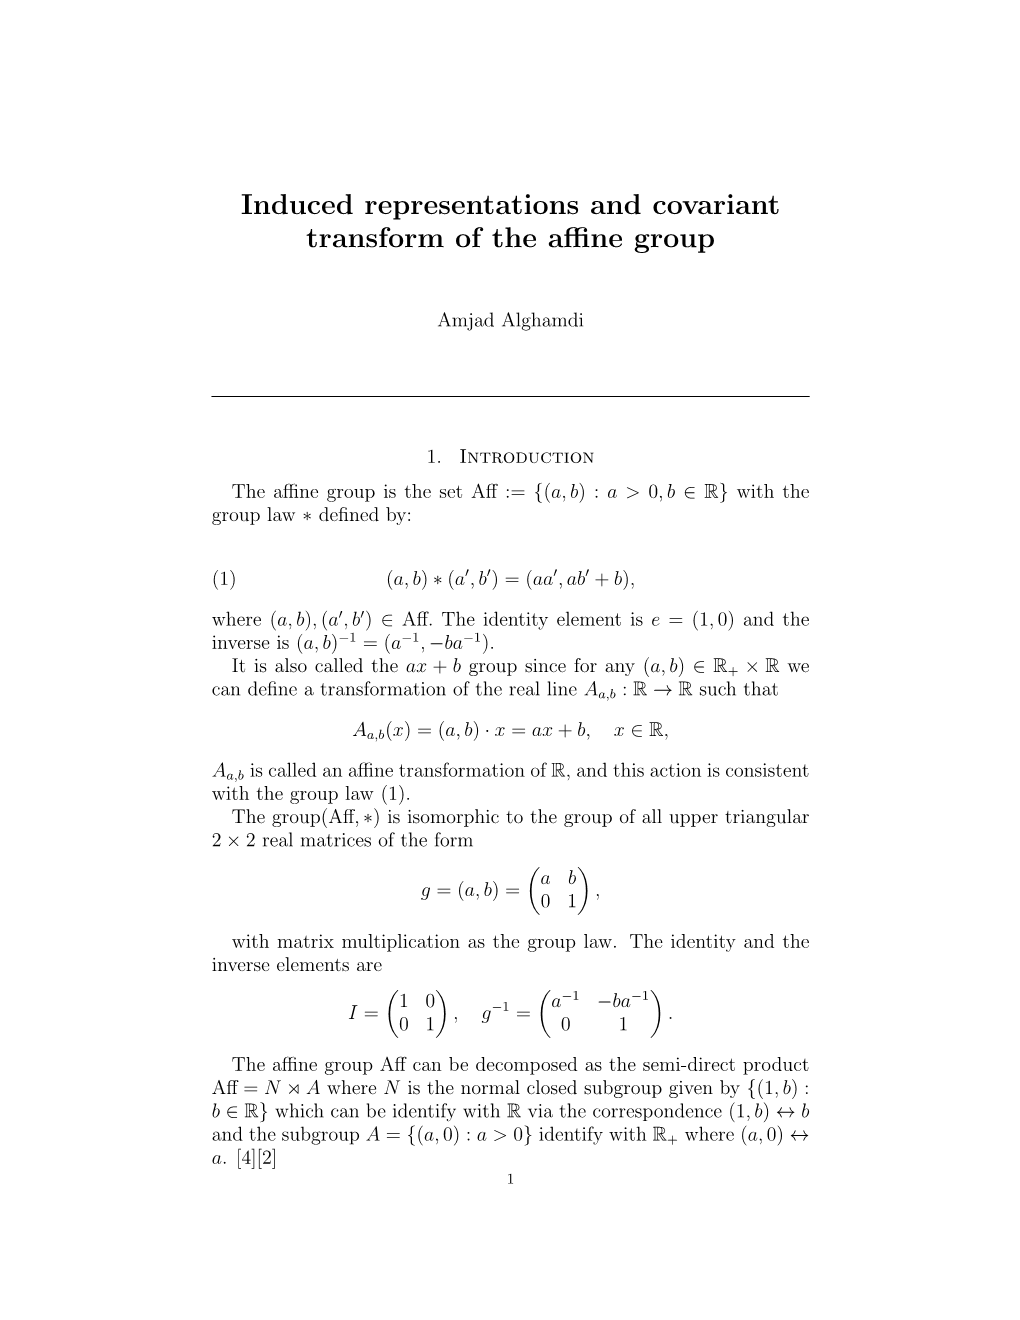 Lecture Notes on the Affine Group Representations